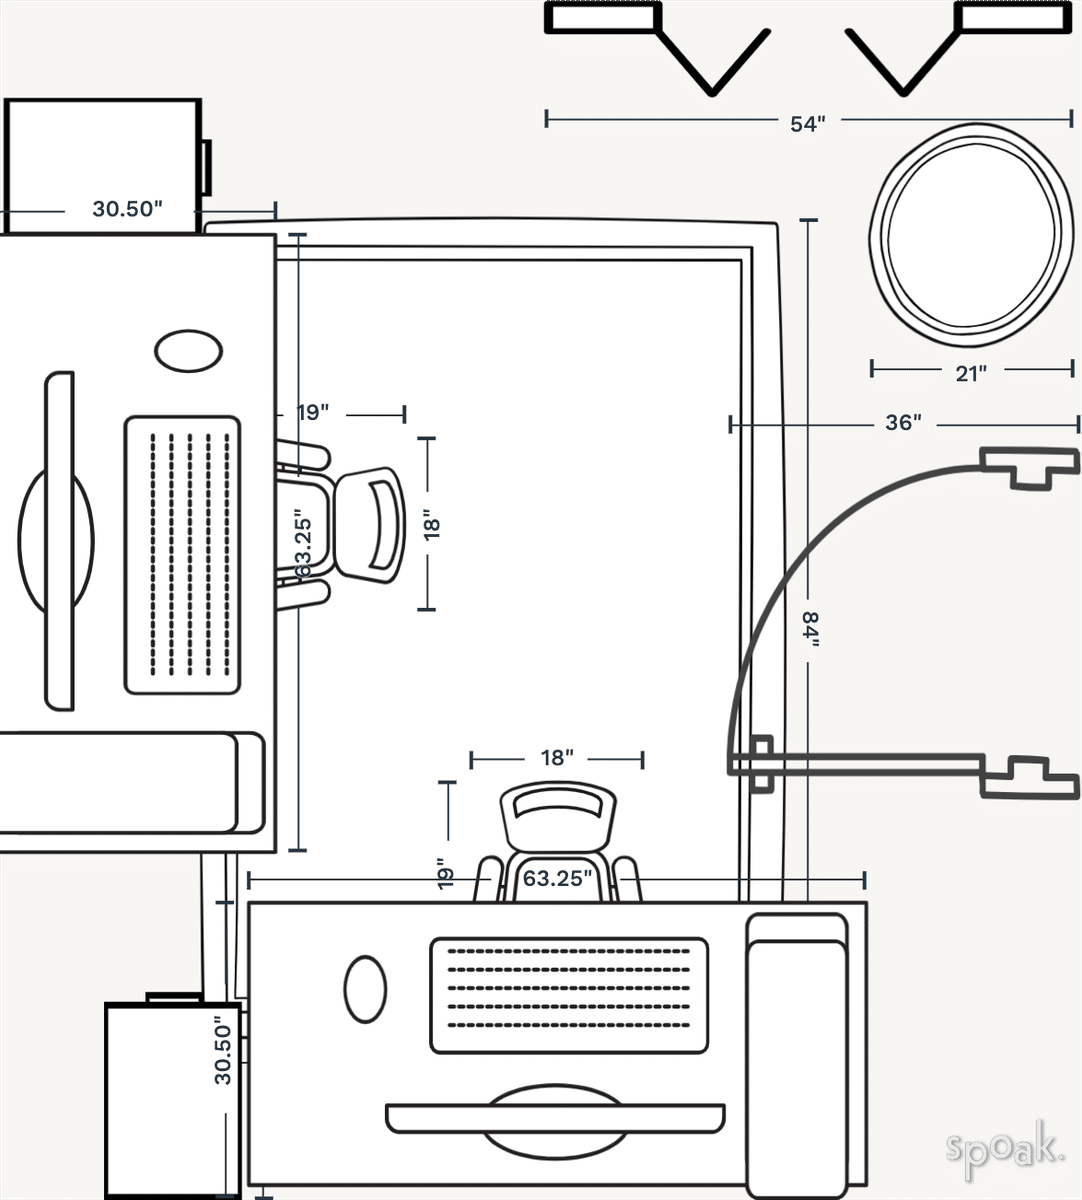 Office Floor Plan designed by Darian Armstrong